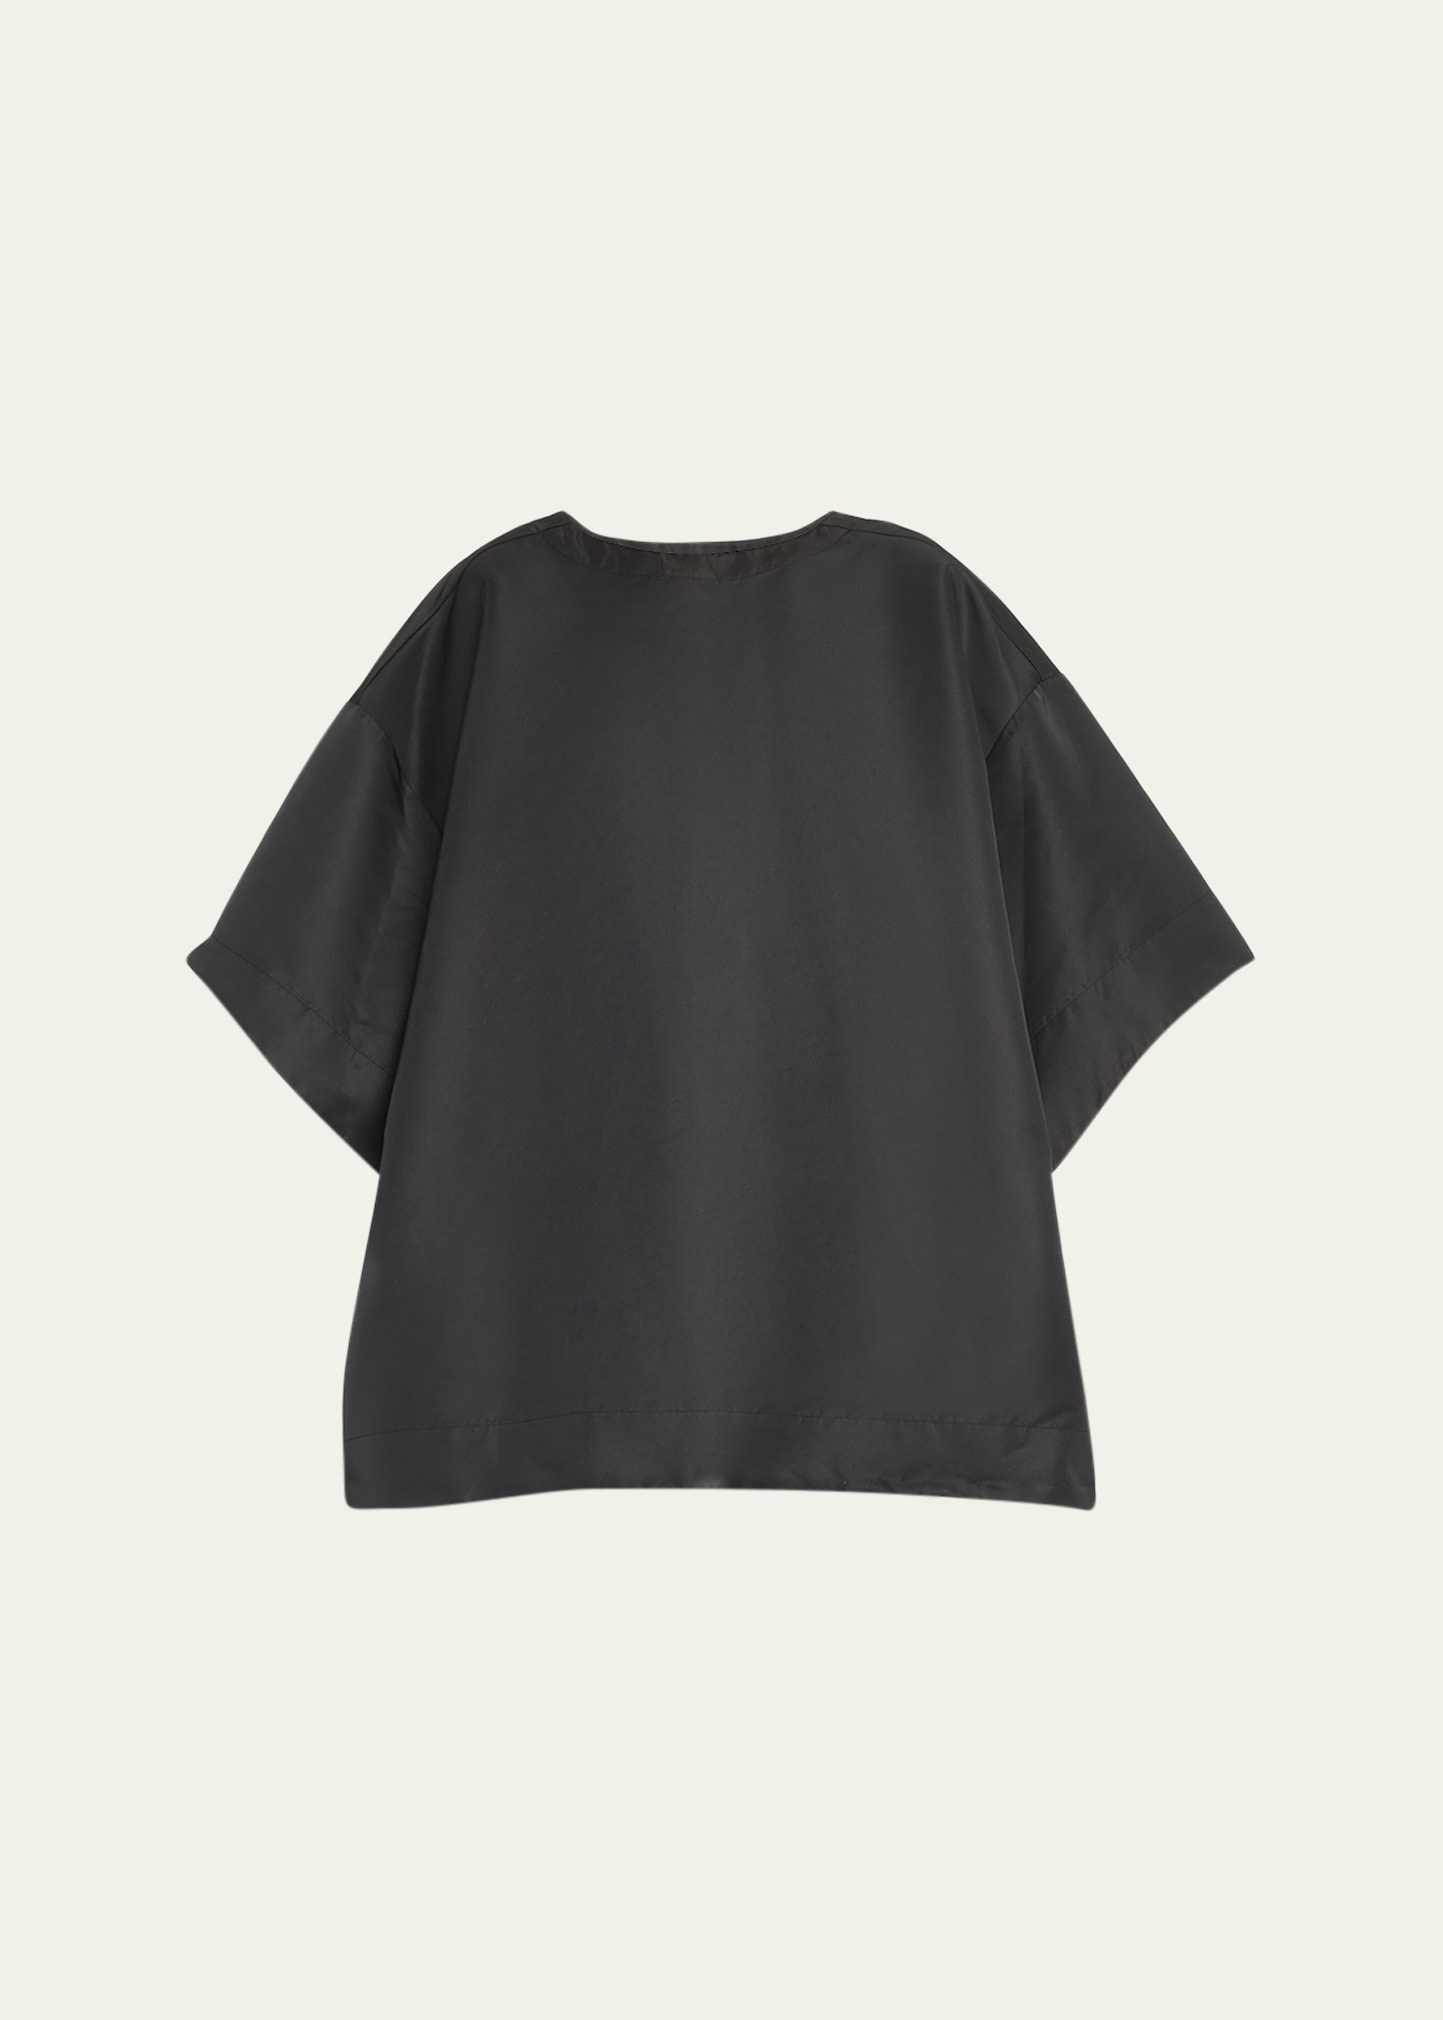 Puppets And Puppets Sculpt Boxy Tunic Top In Black